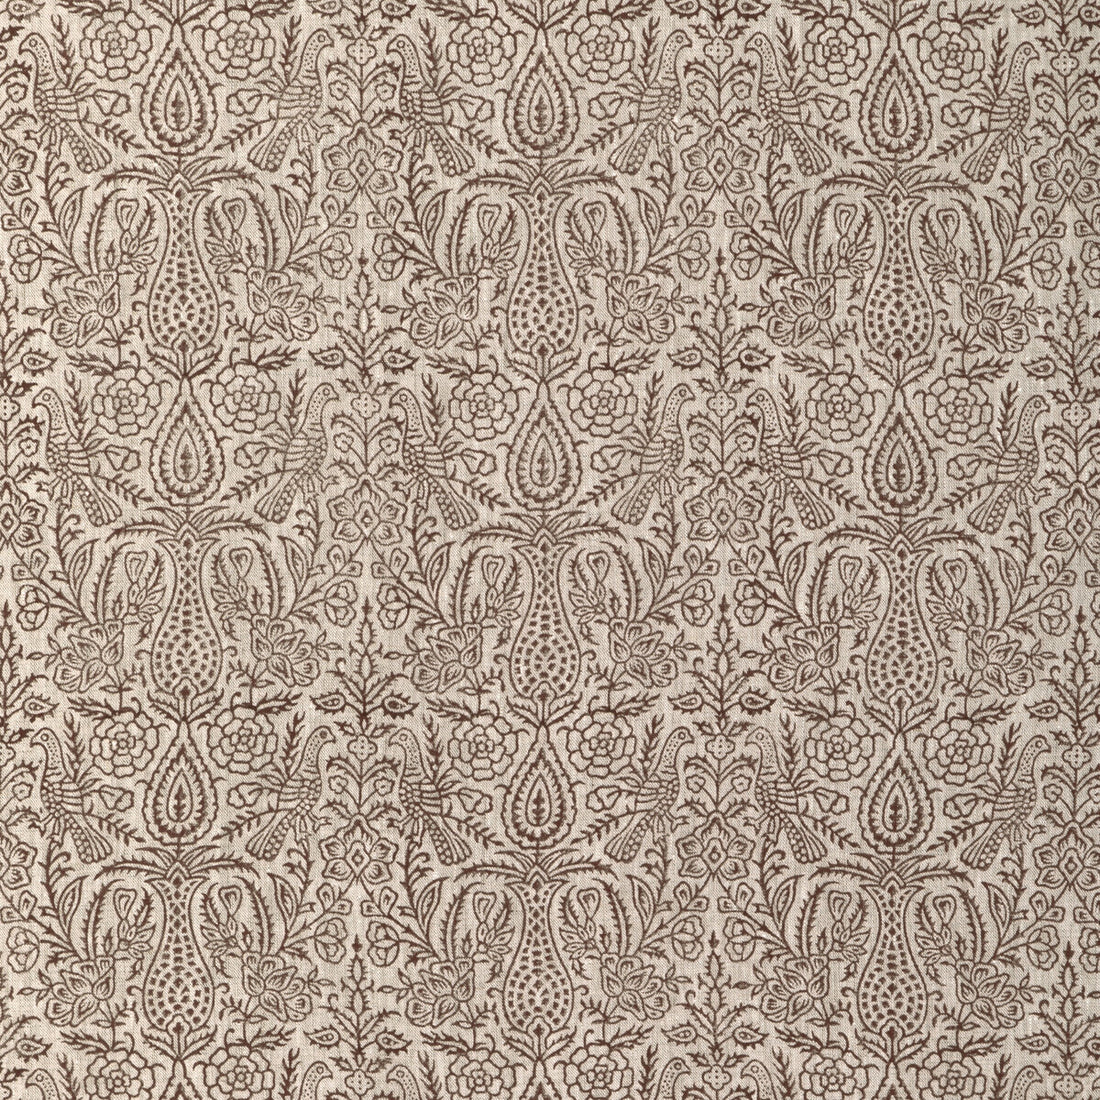 Haven Handblock fabric in java color - pattern 2023101.6.0 - by Lee Jofa in the Clare Prints collection